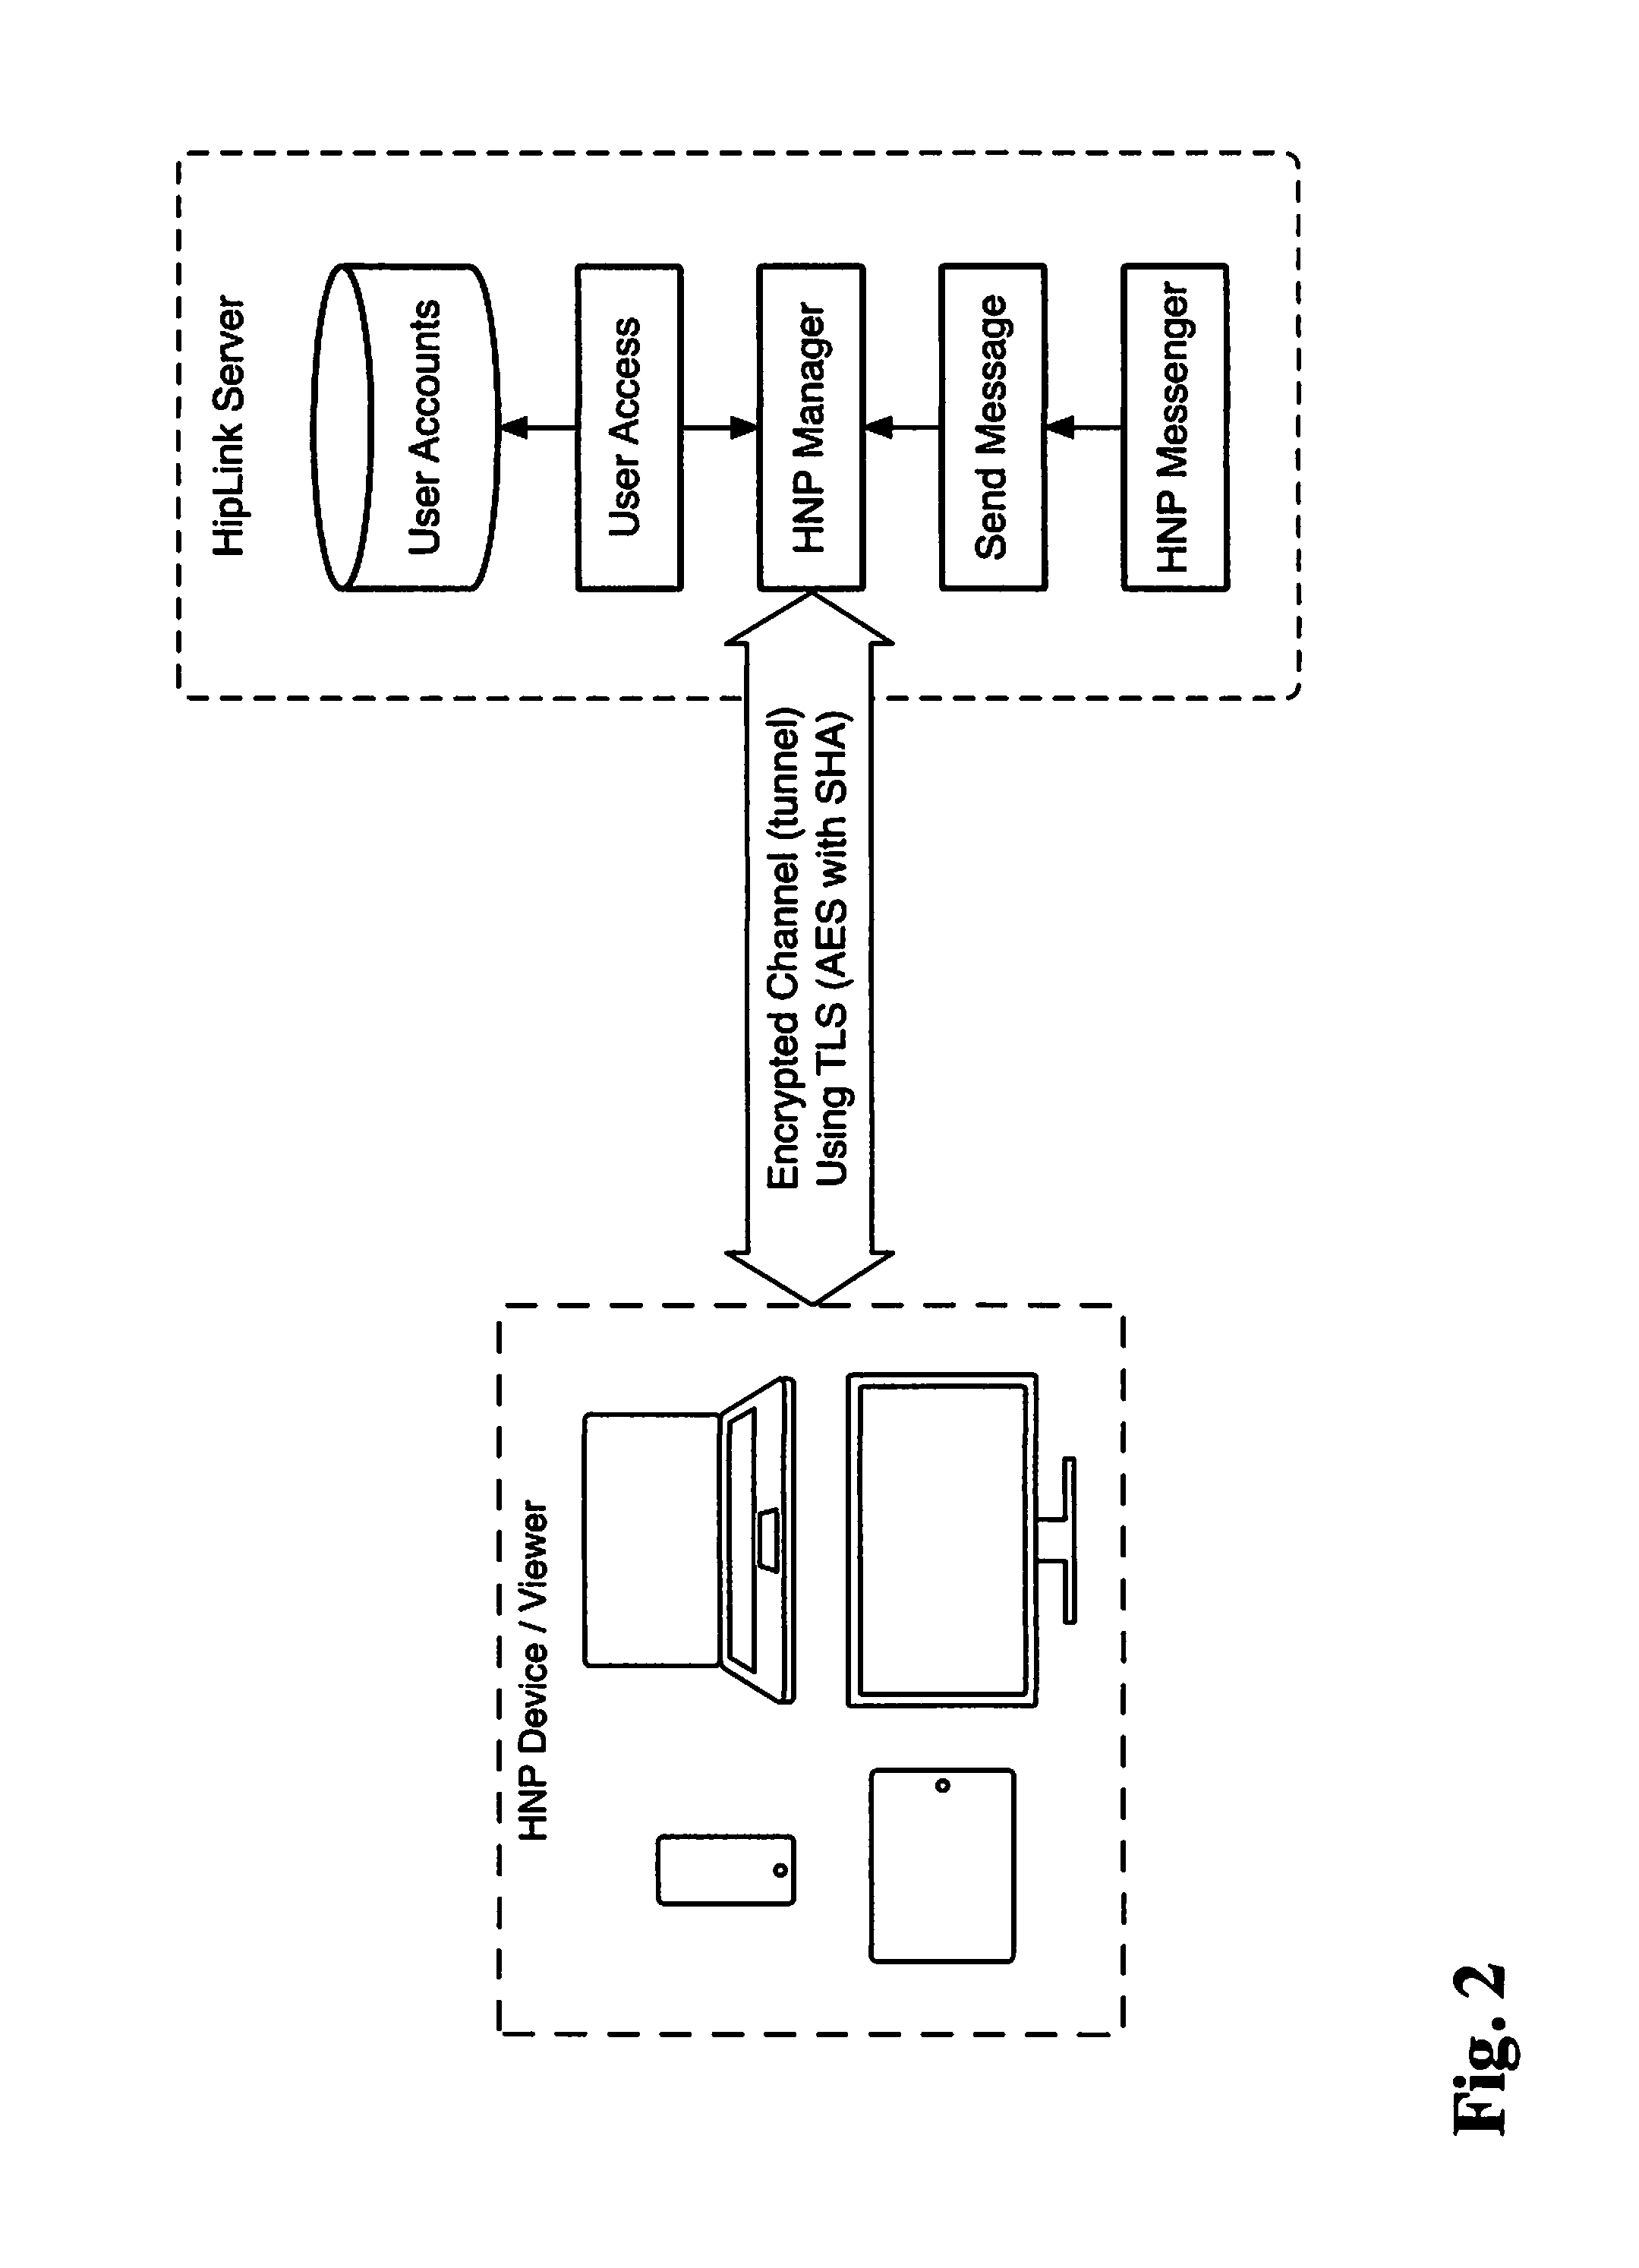 System and Method for Message Dispatching and Communication